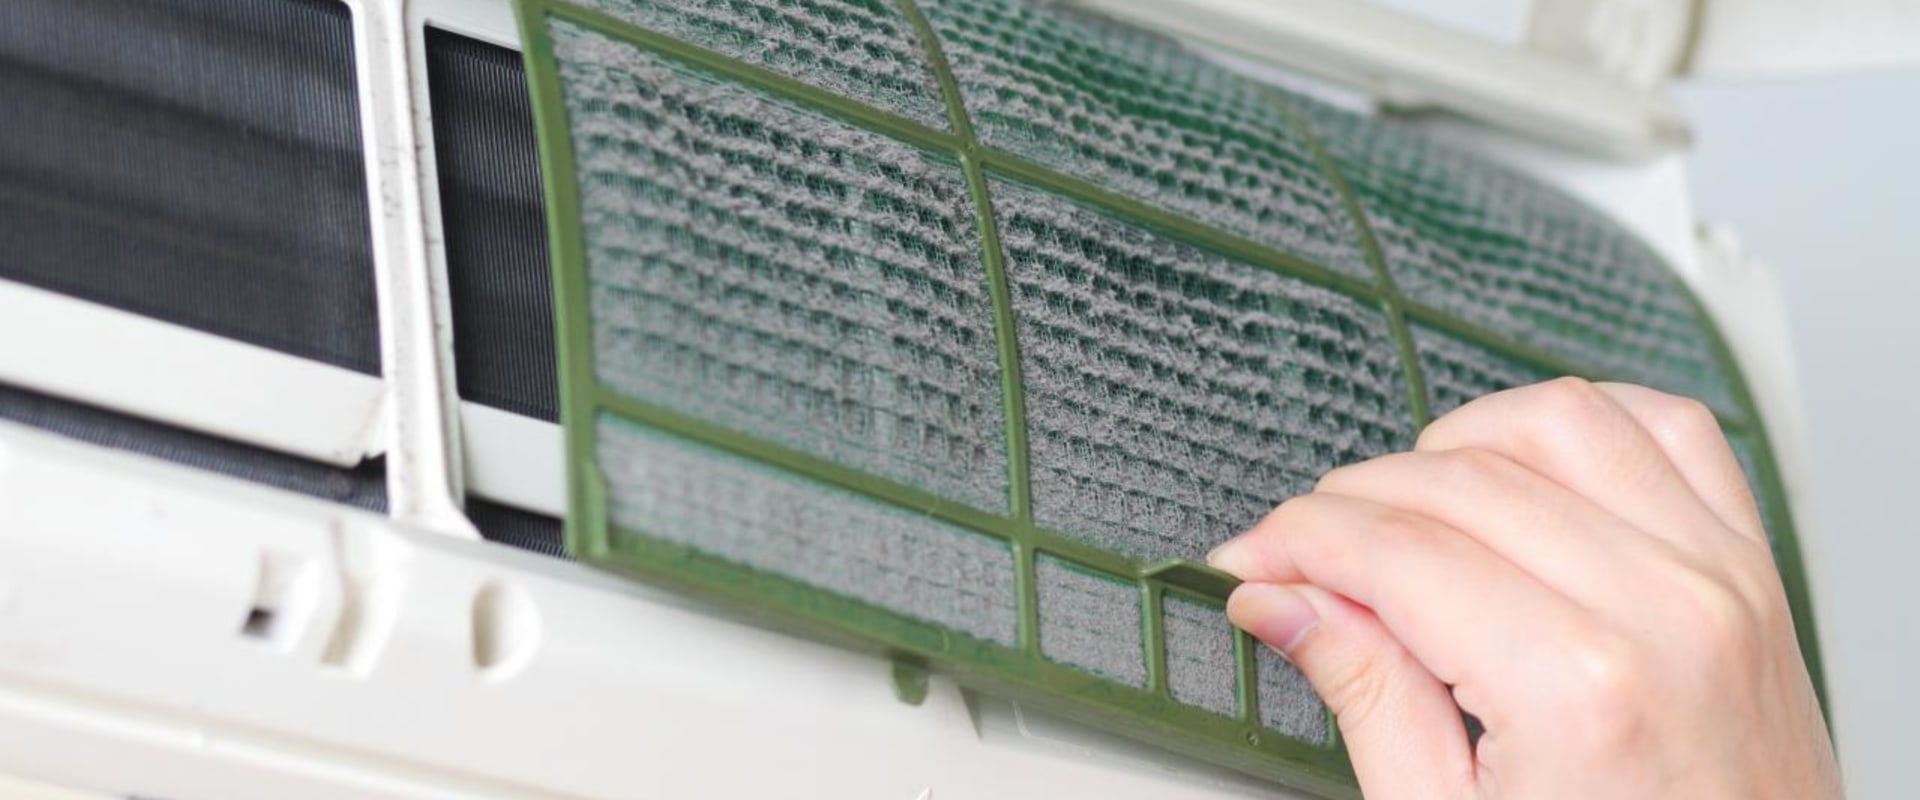 How to Clean a Washable Air Filter: A Comprehensive Guide